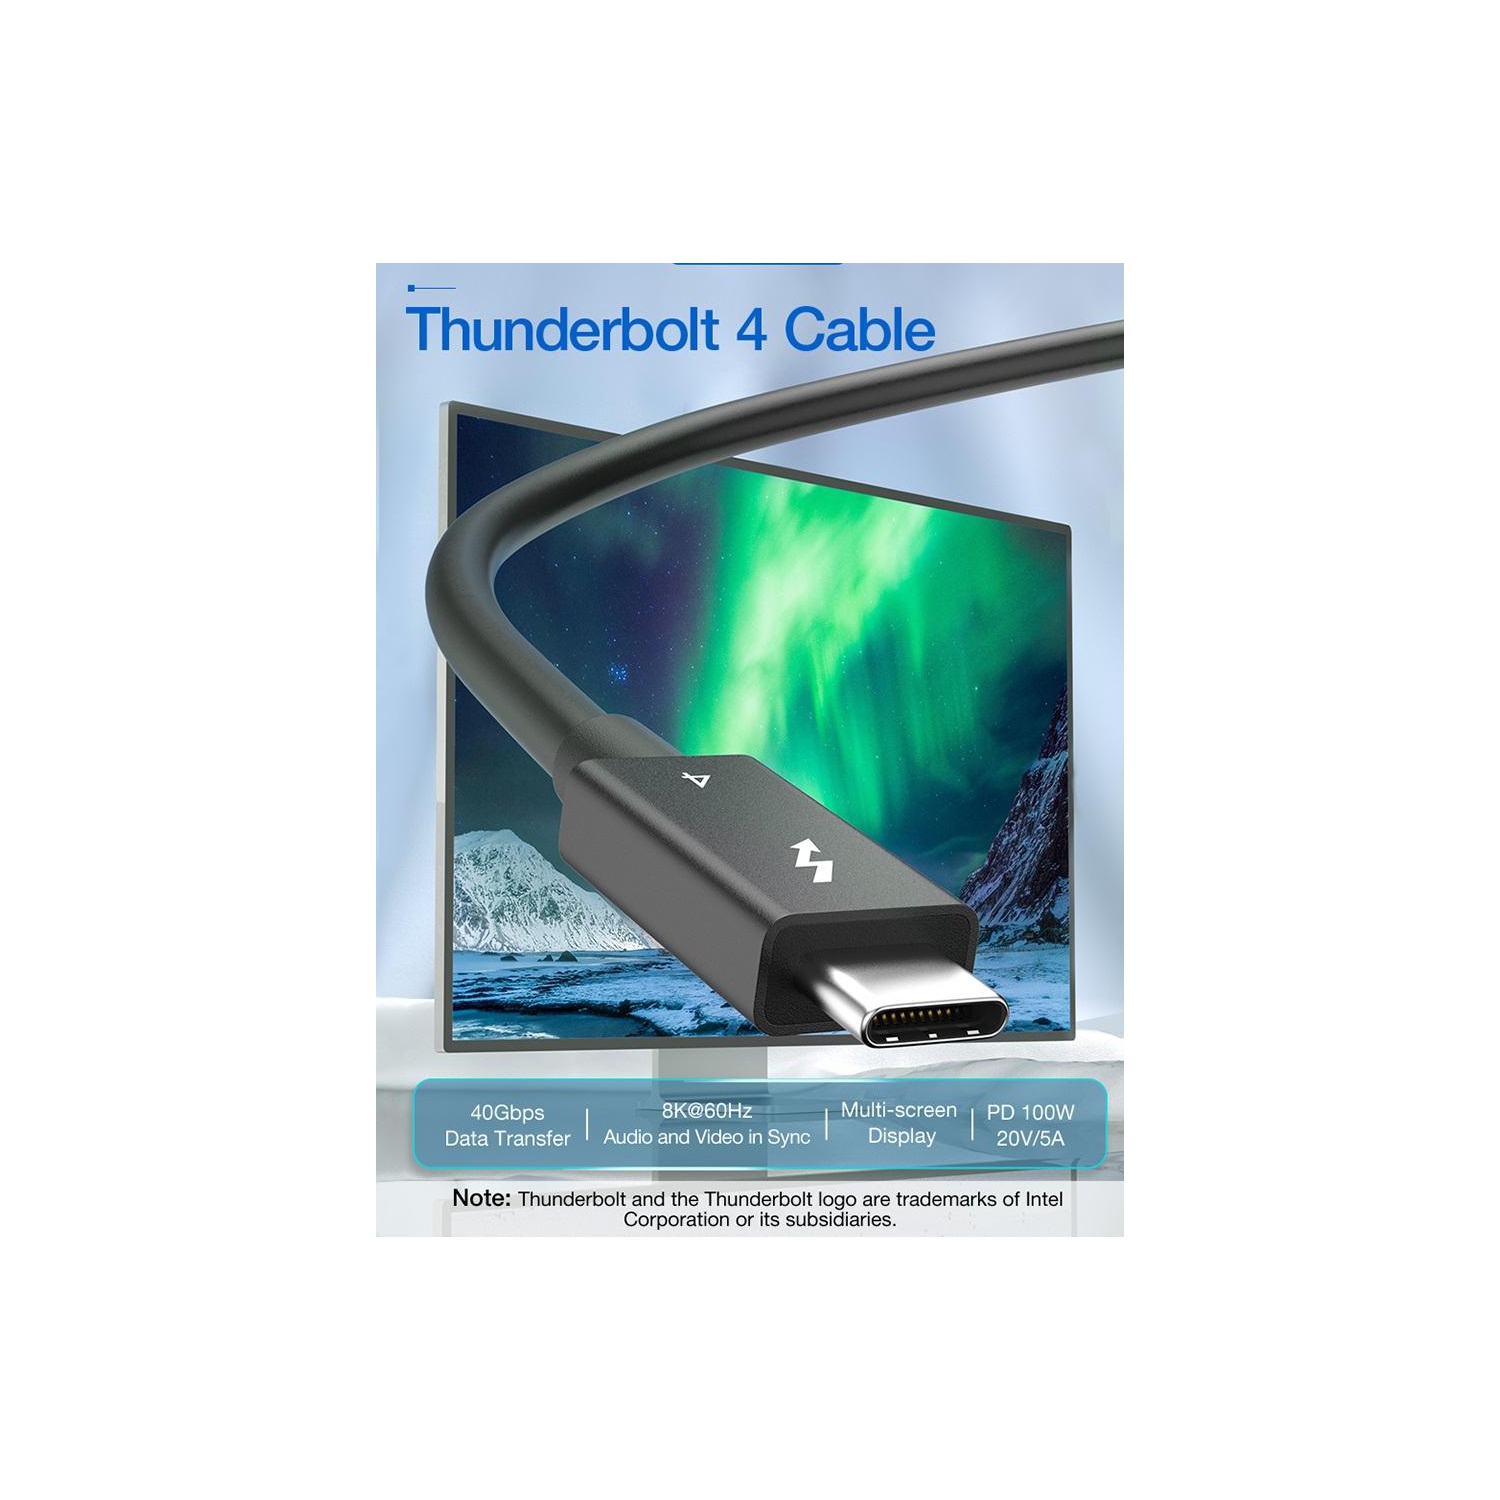 LaptopKing Thunderbolt 4 Cable 1.2M,4feet Supports 8K Display